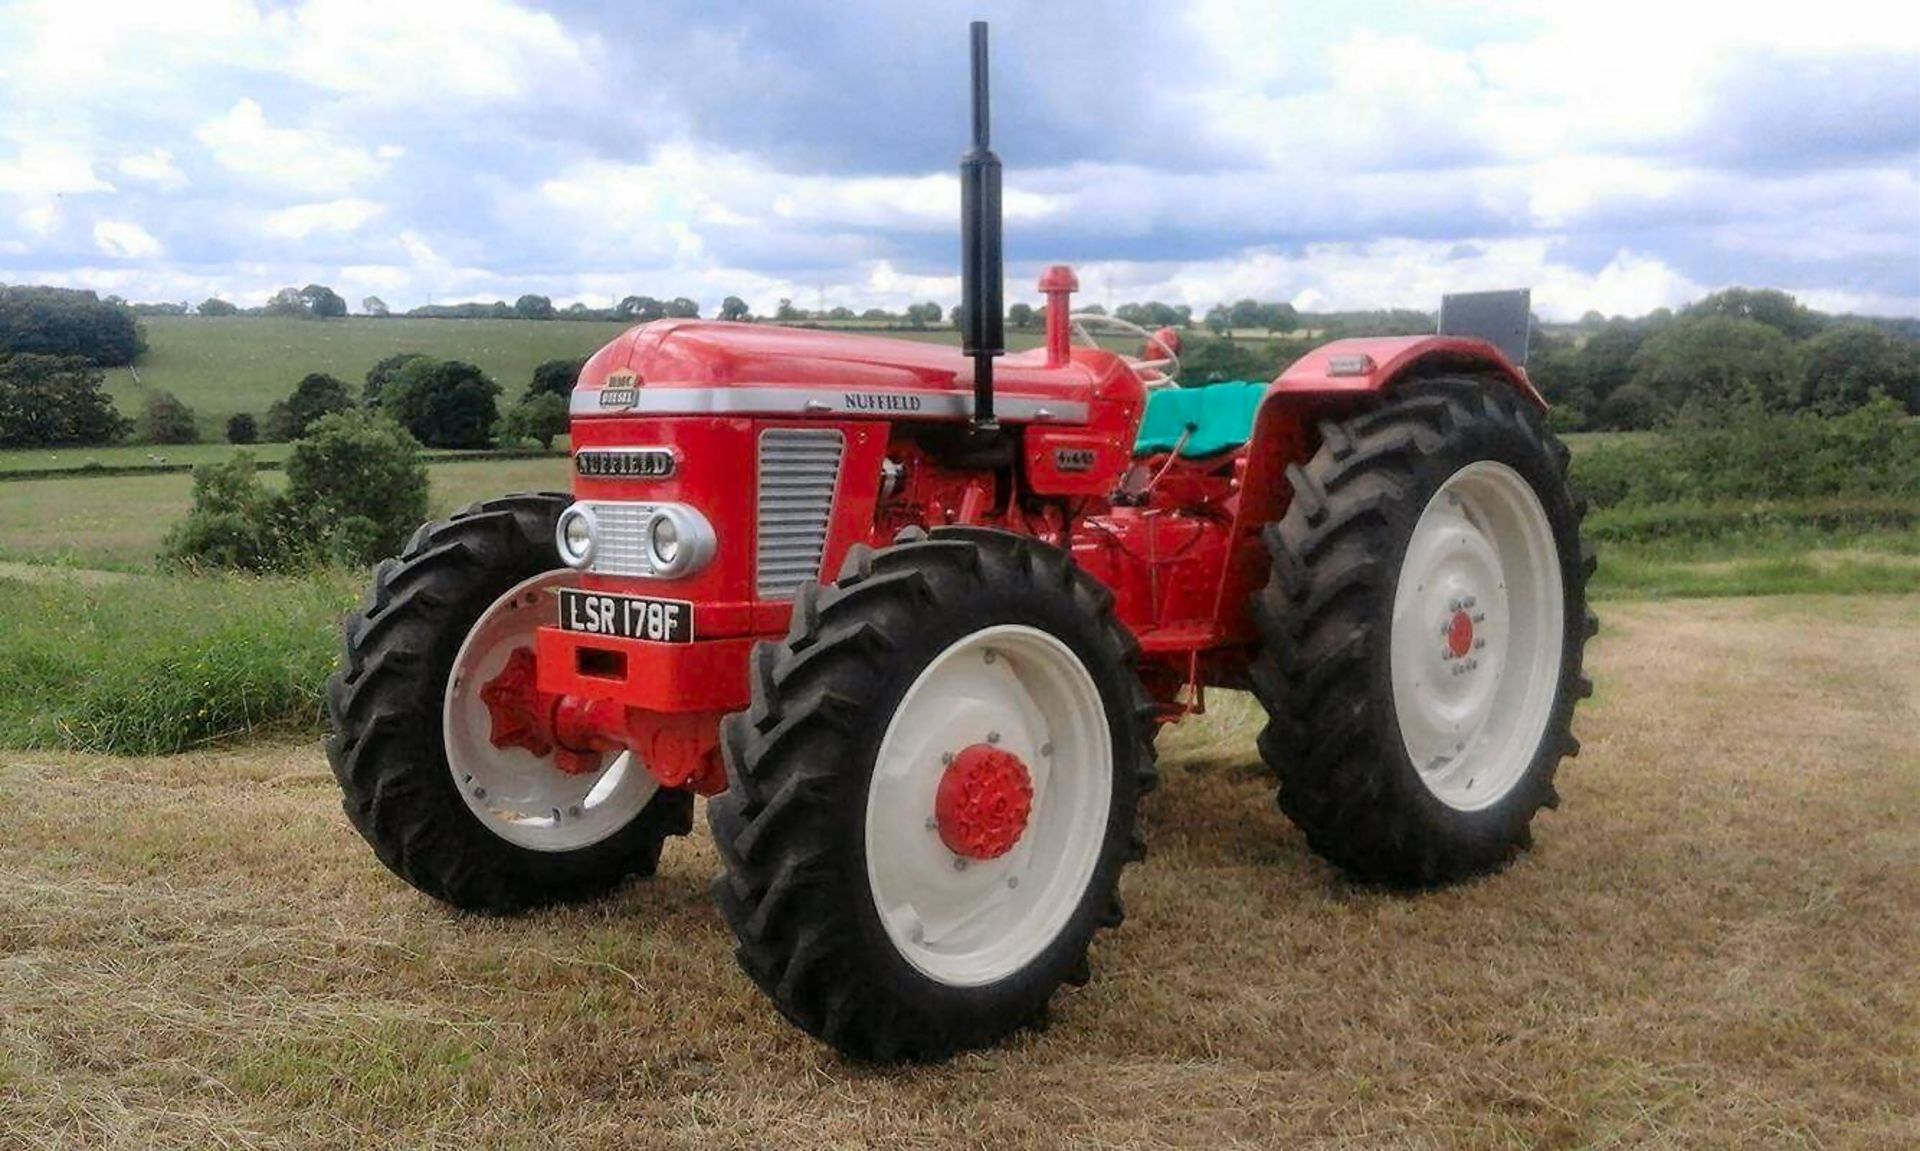 1968 NUFFIELD 465 4wd 4cylinder diesel TRACTOR Reg. No. LSR 178F Serial No. 65N108570 Fitted with